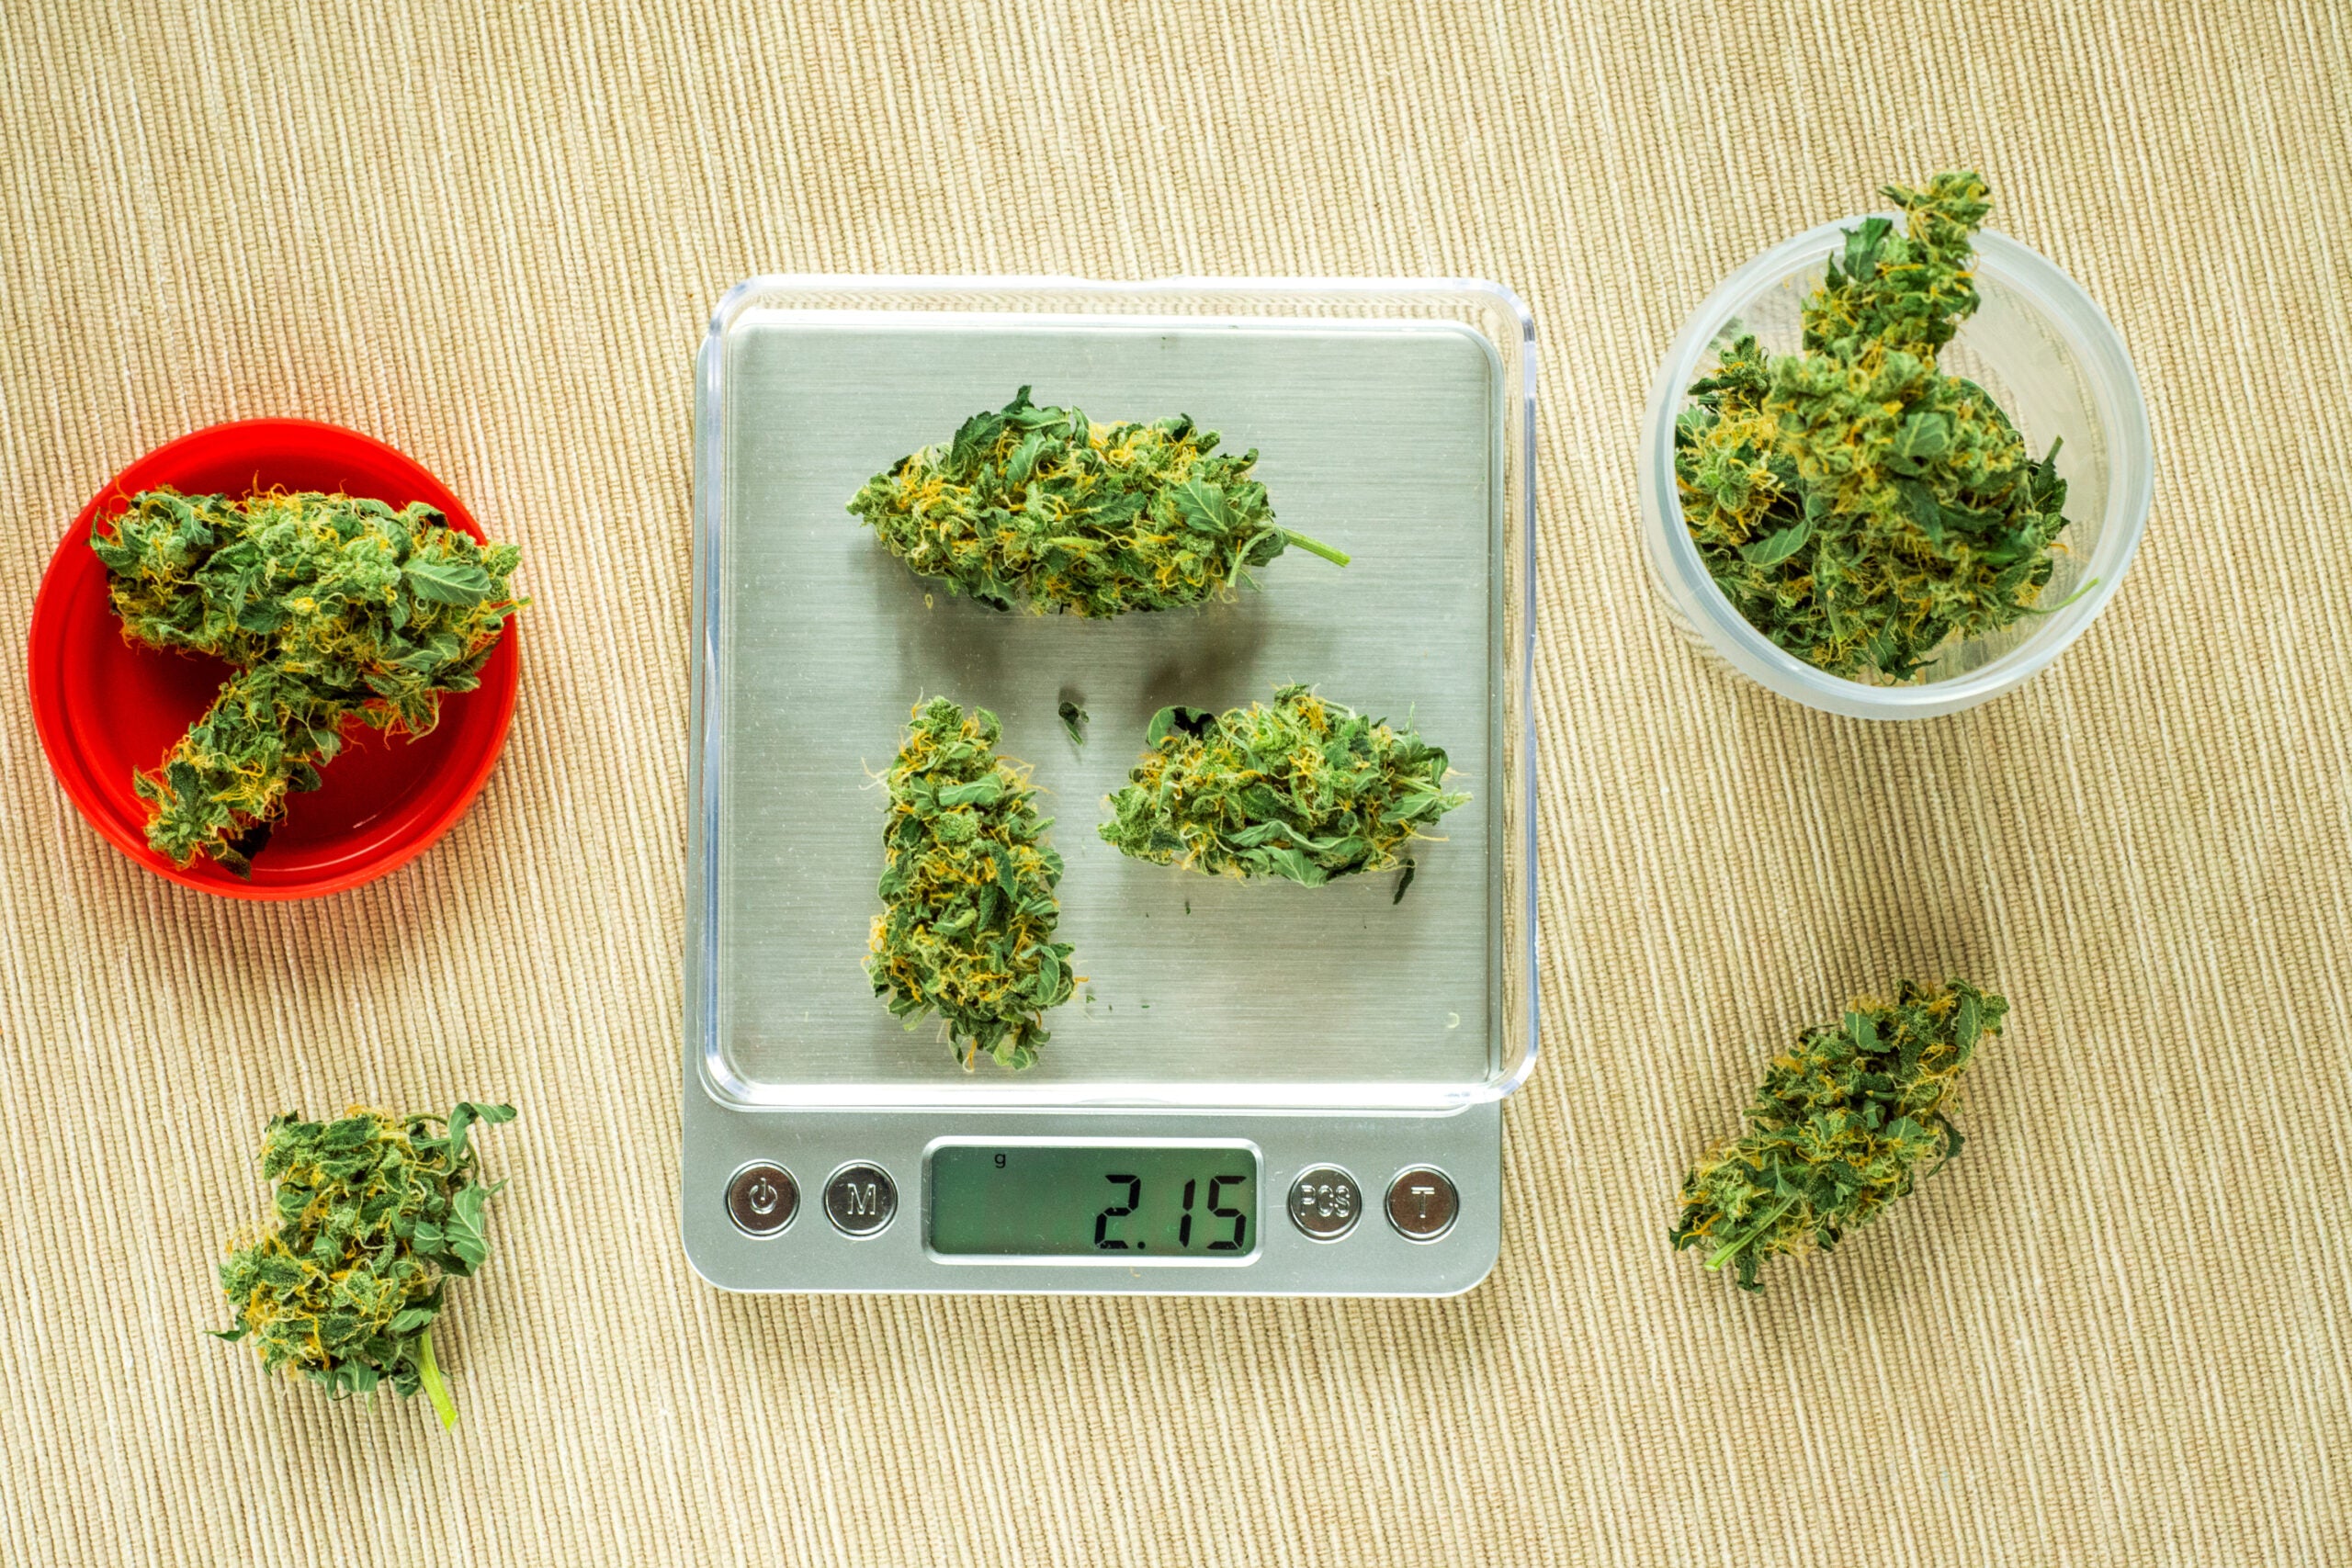 Breaking Down An Ounce: The Factors Affecting Cannabis Prices